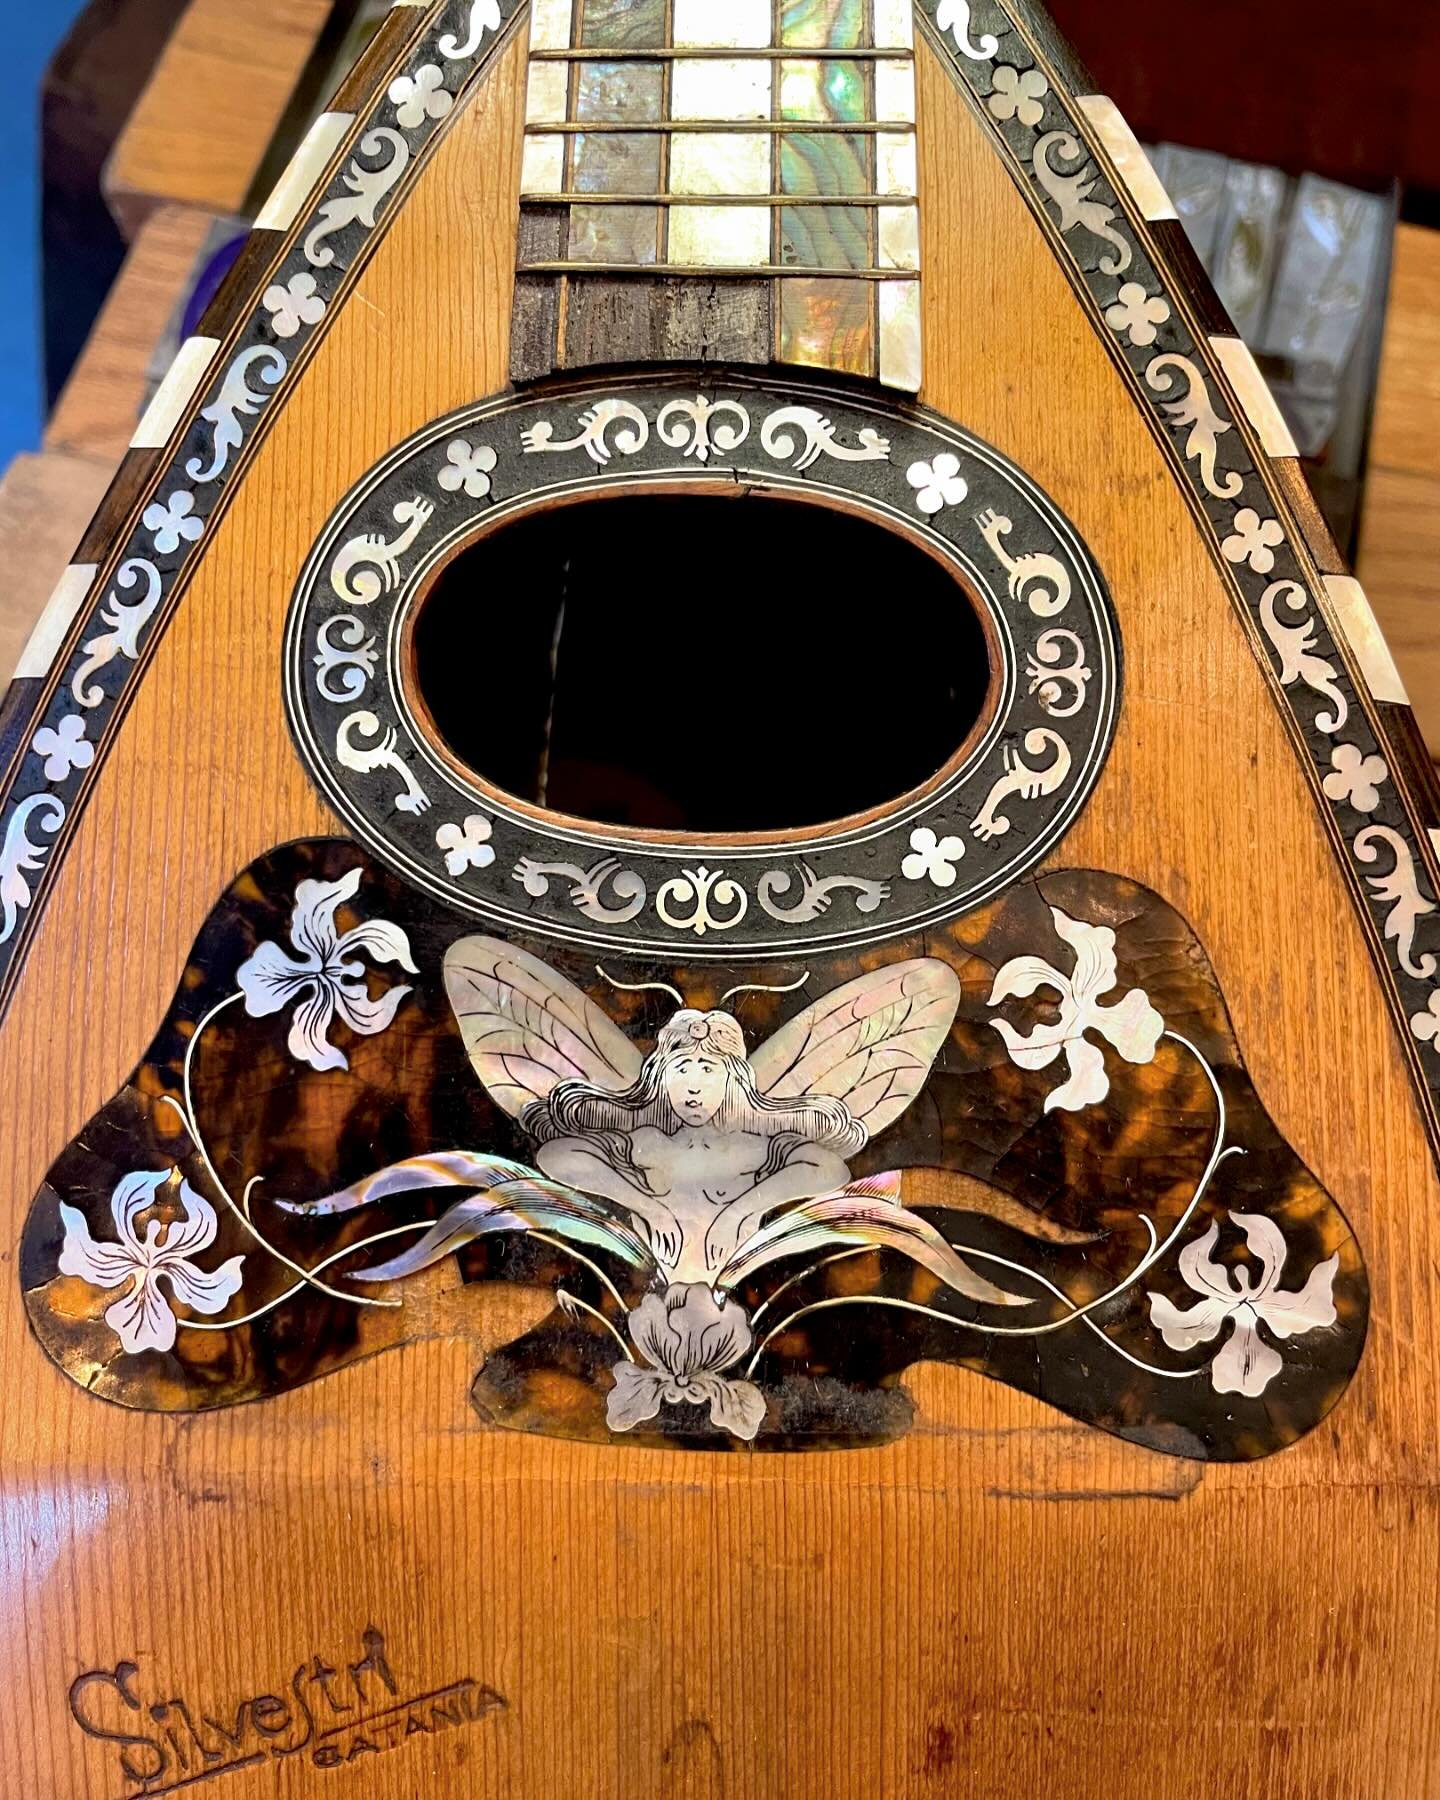 An instrument that may never play another note, but, will continue to stir hearts through sheer will of beauty!

This 90-ish year old Italian mandolin came to us today with a split body and missing several pieces of its inlaid mother of pearl. And, y